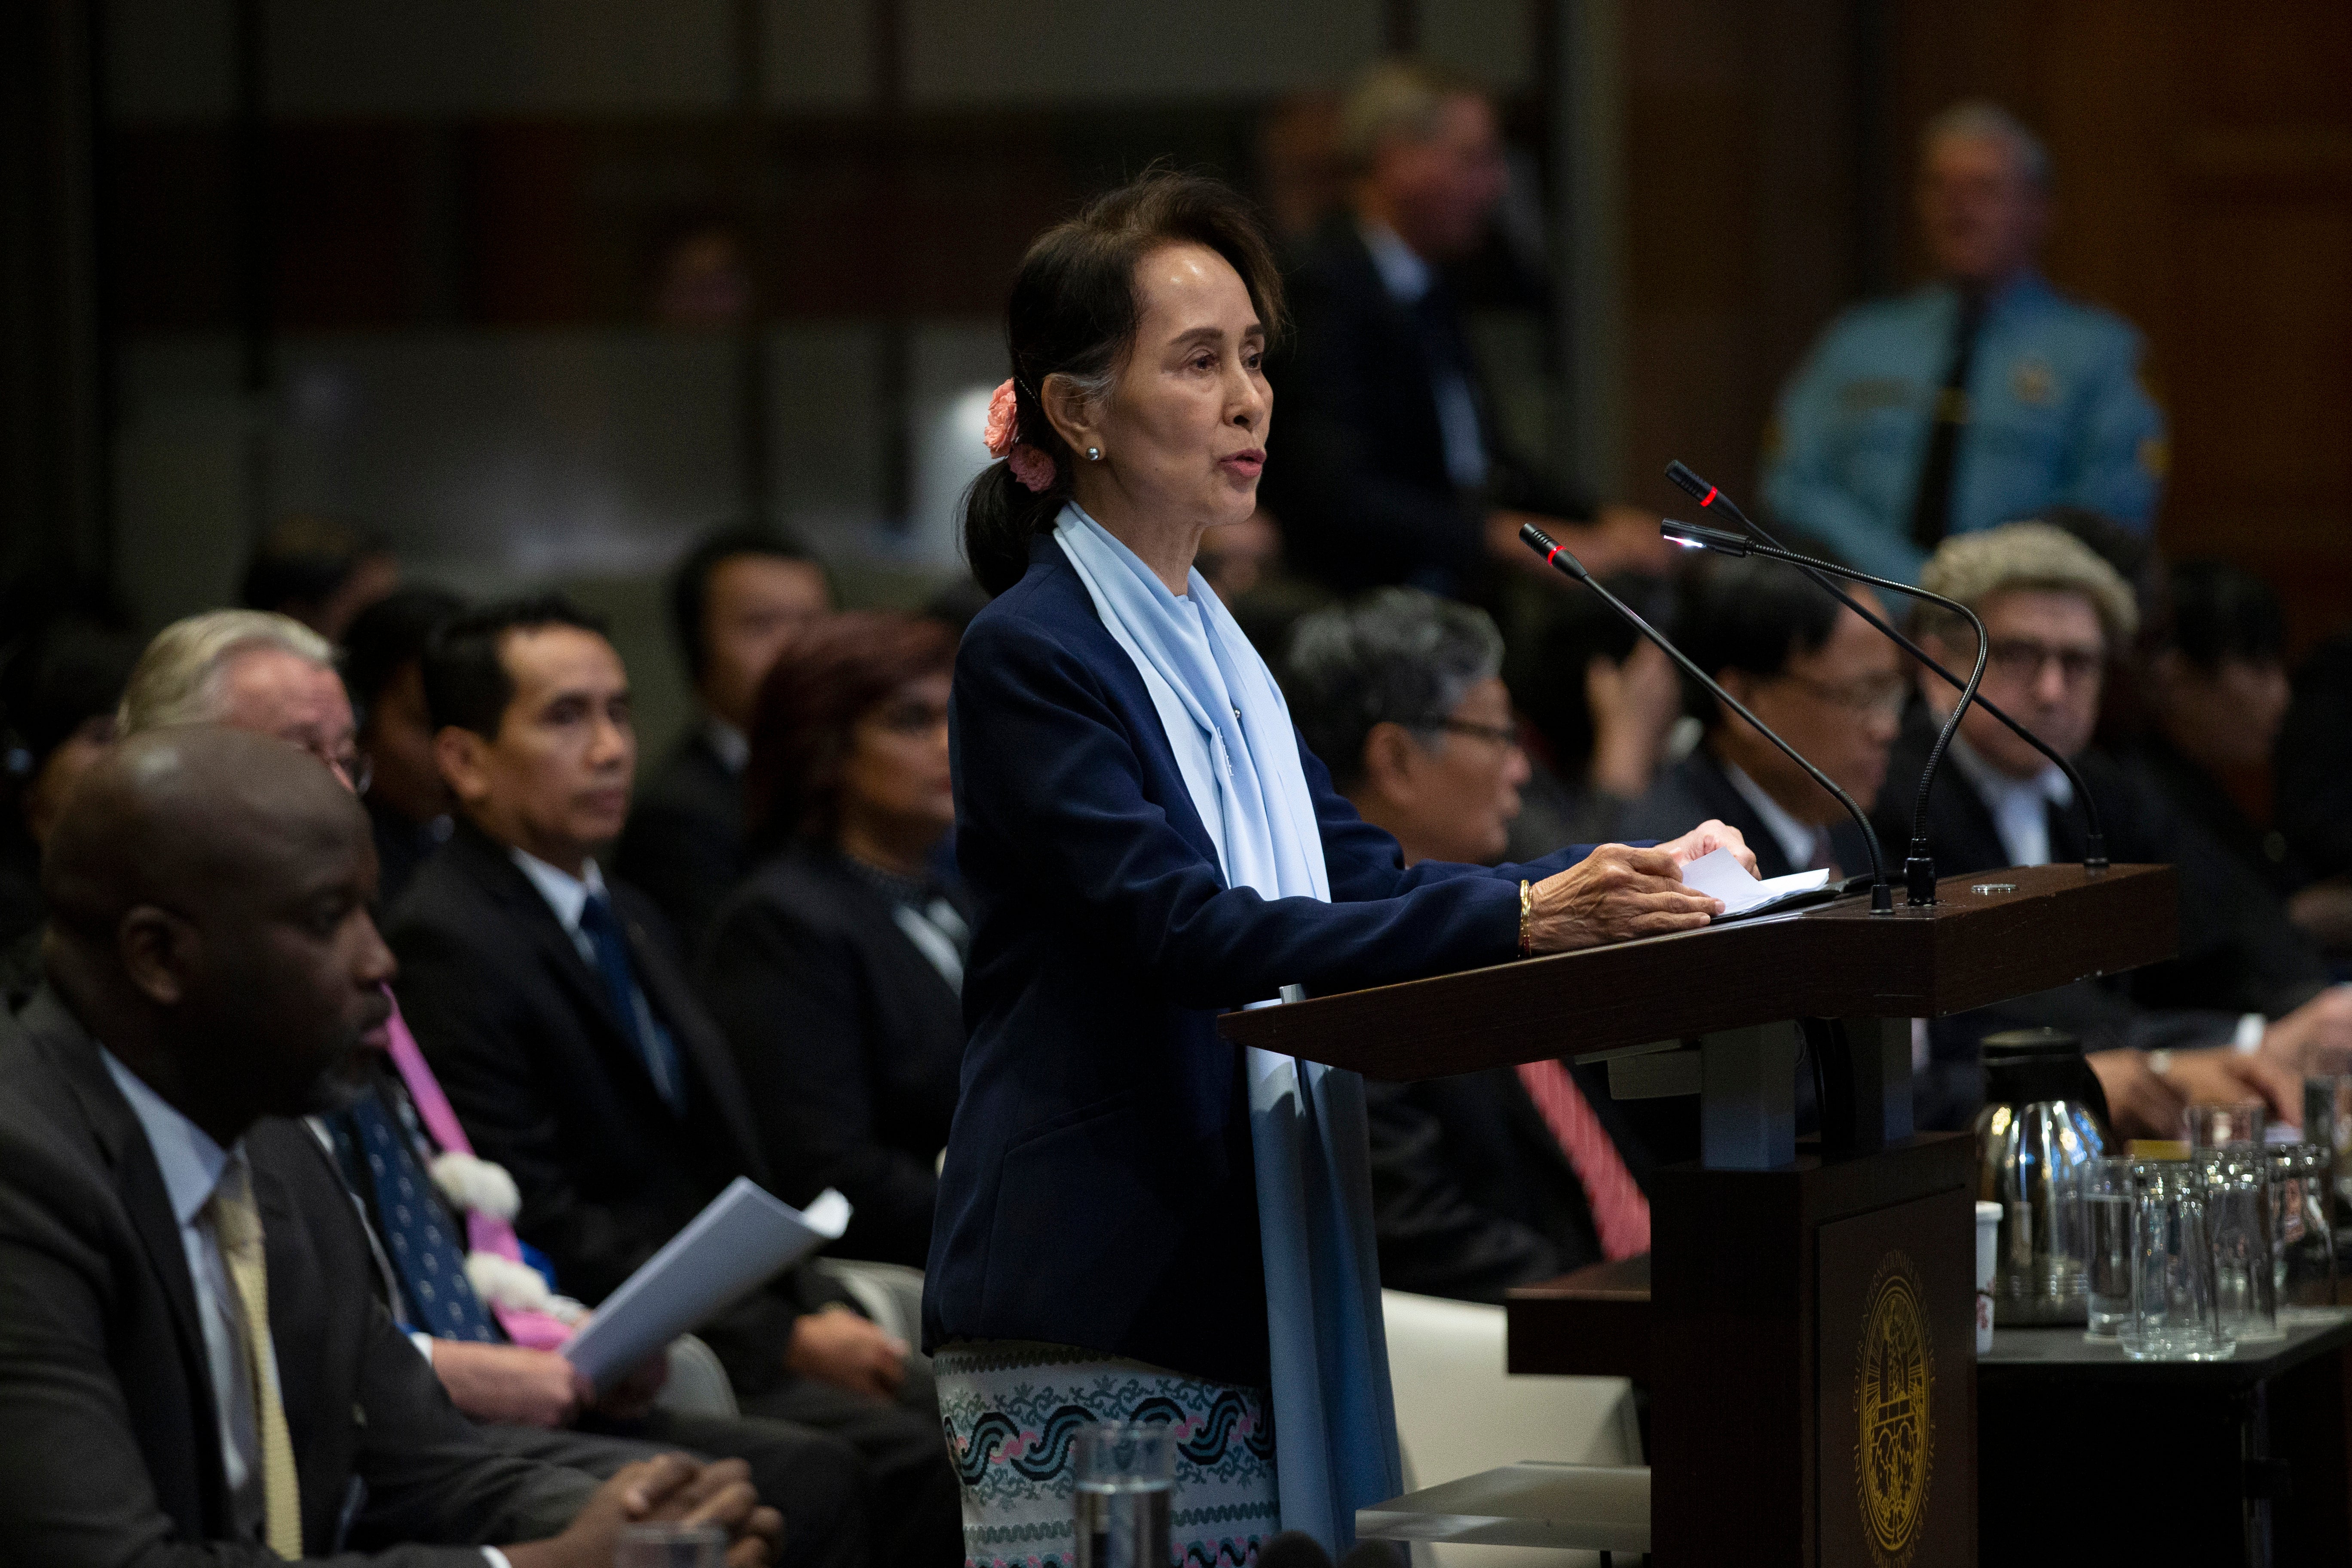 Aung San Suu Kyi addresses the International Court of Justice in The Hague, 11 December 2019